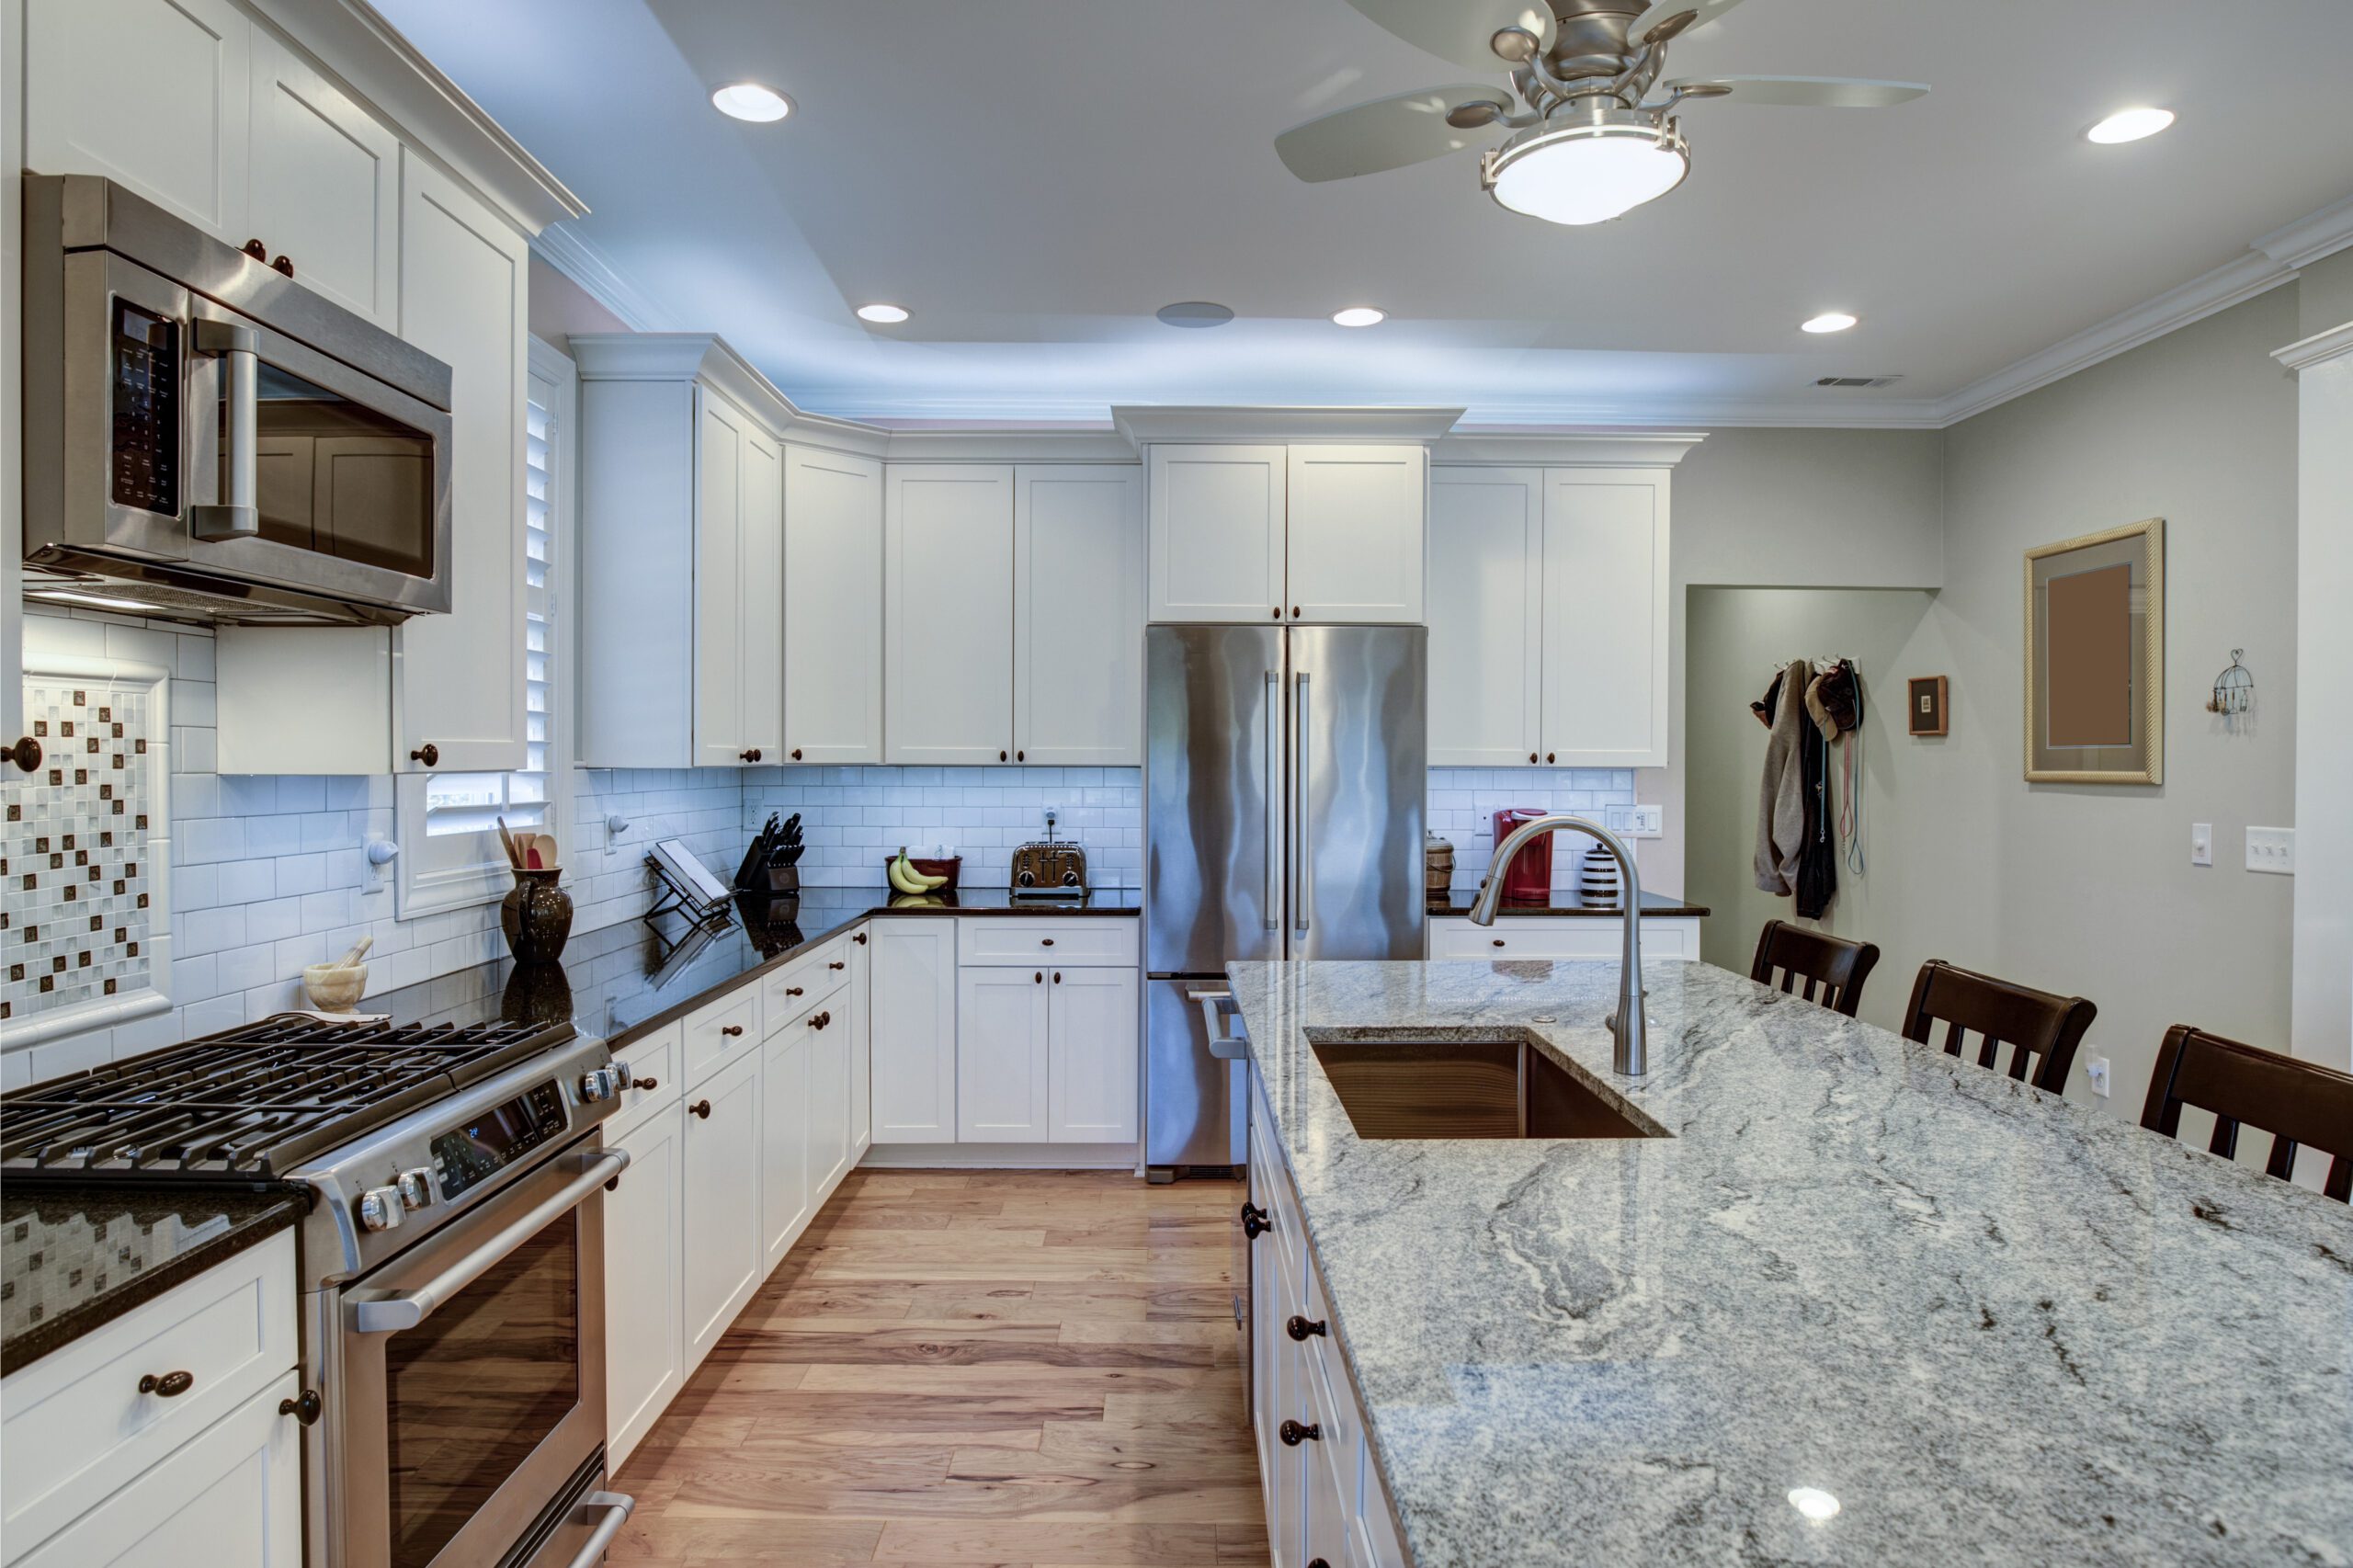 Beautiful luxury kitchen with quartz and granite countertops and